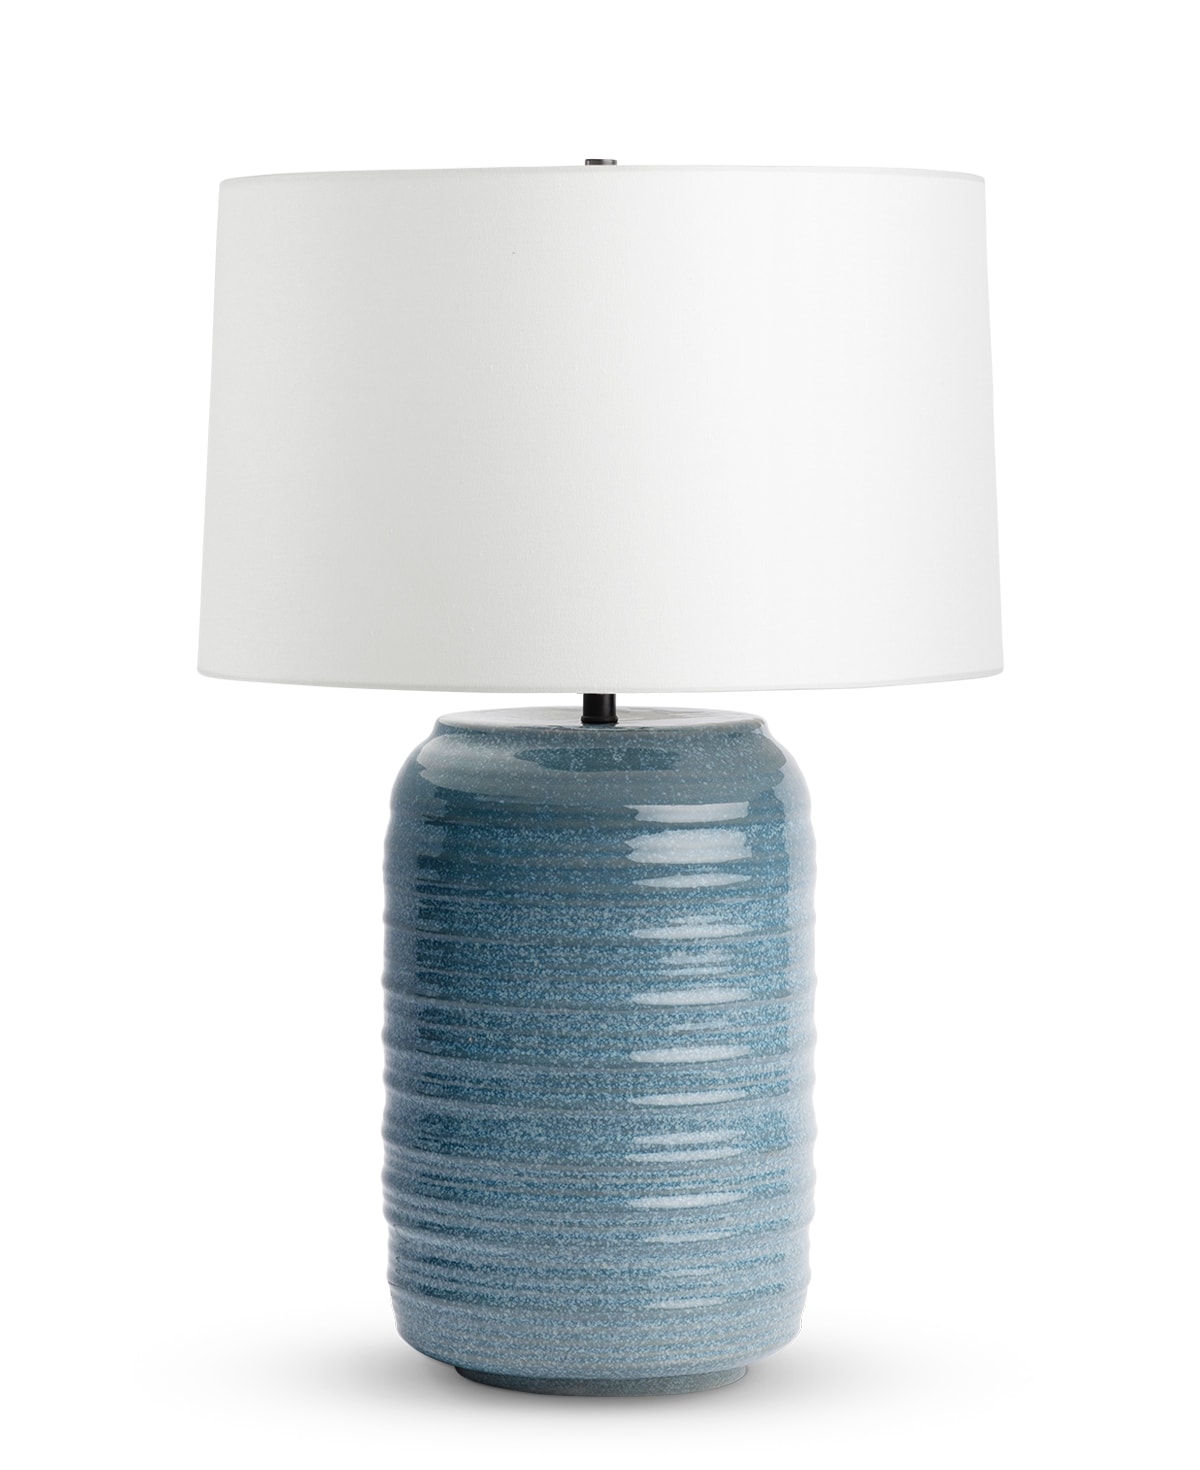 FlowDecor Dolphin Table Lamp in ceramic with blue finish and off-white linen tapered drum shade (# 4612)